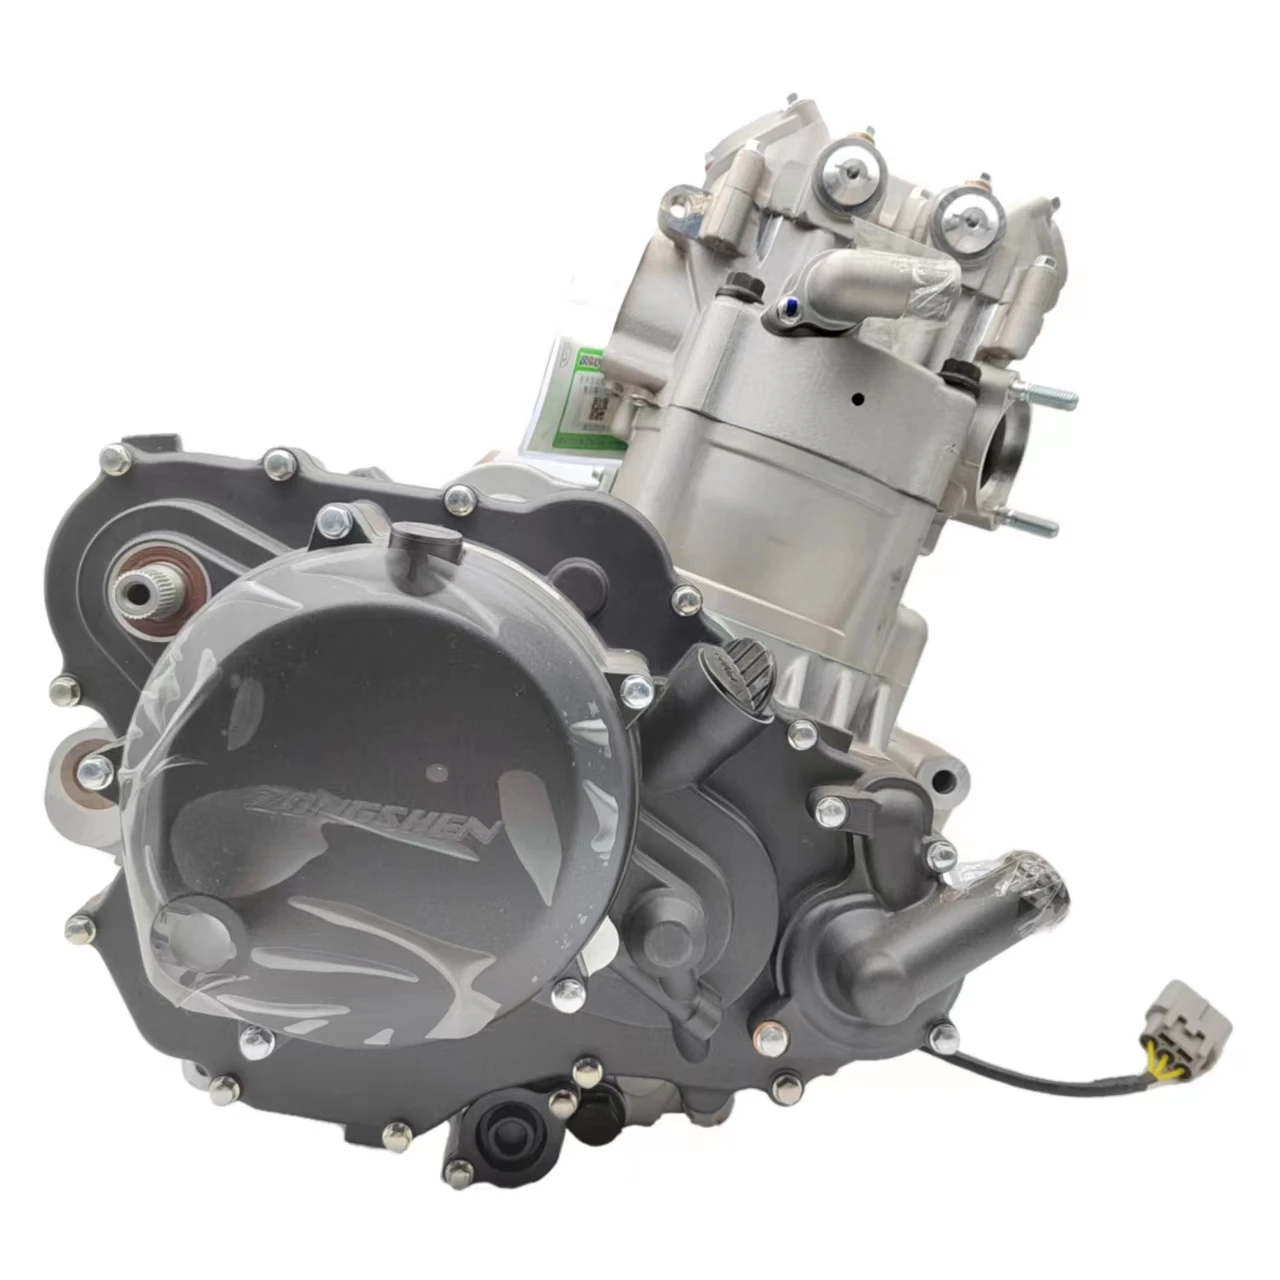 EOM off-road motorcycle engine 450cc Zongshen NC450cc water-cooled RX4 rally car engine motorcycle engine assembly